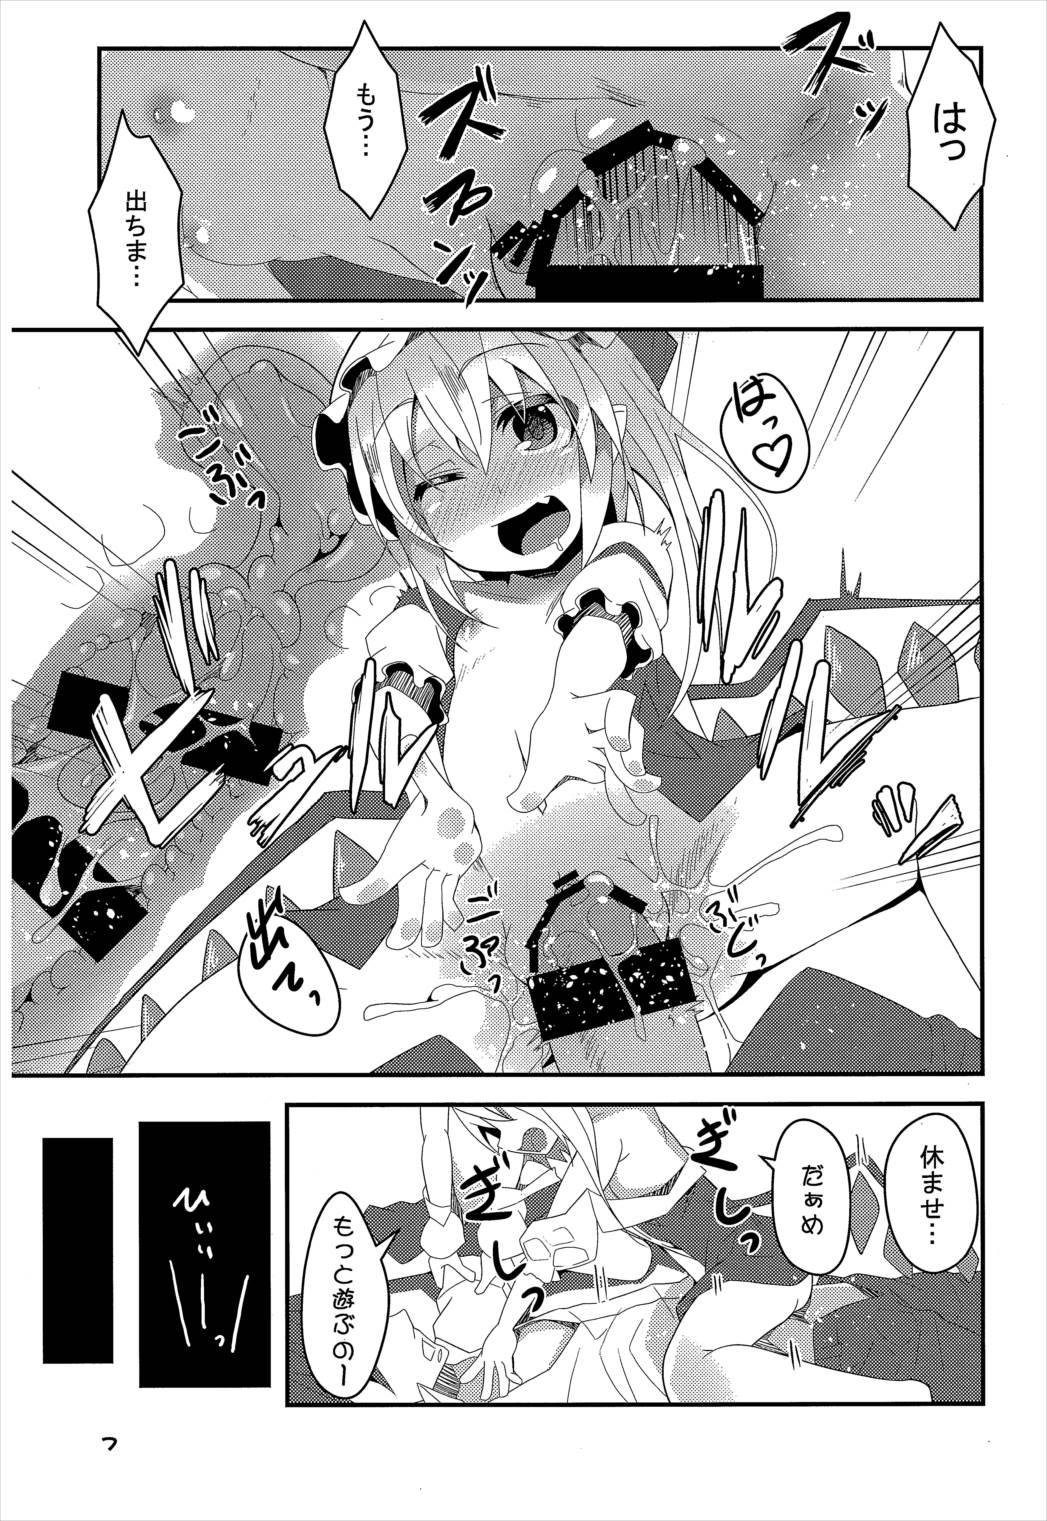 Italiano Four of Flan-chan no Gyakushuu - Touhou project Spooning - Page 6